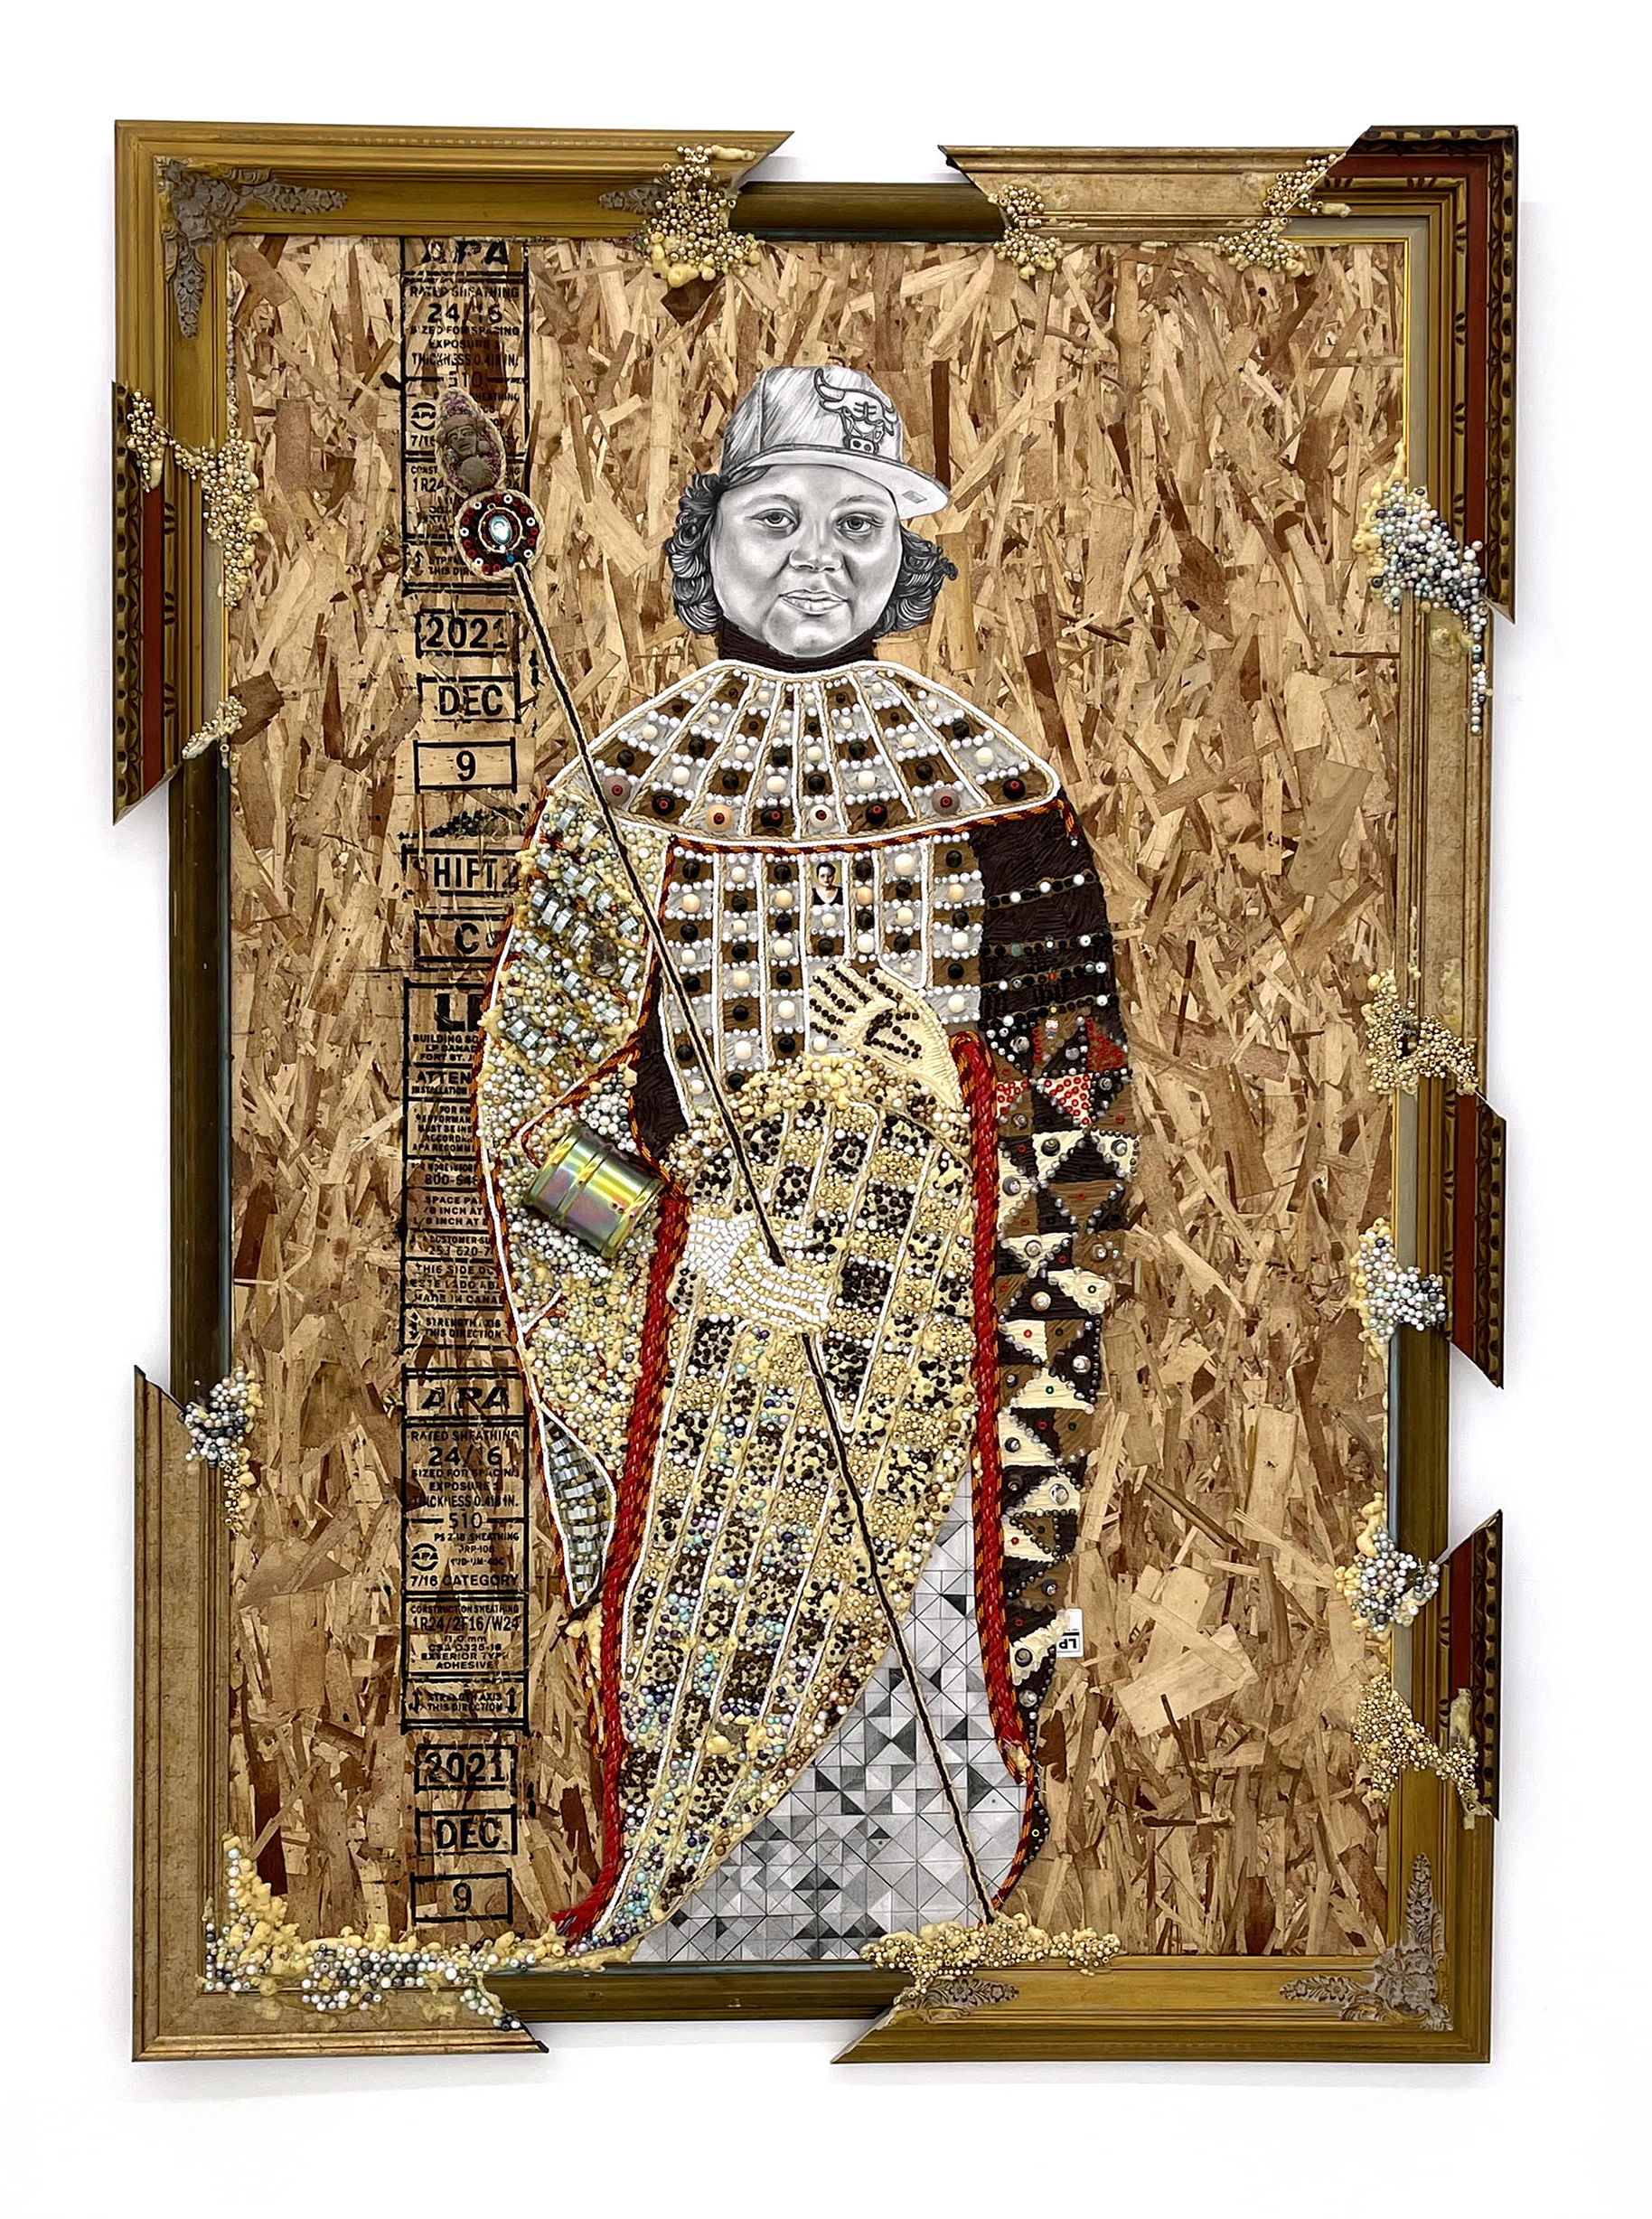 Maria, the artist's mother depicted in her early twenties, the figure mimics the majesty of Byzantine illustration of Maria Antioch. Her imperial pose is shrouded in ornate materials - beads, rope, and glitter. Crowning her head is a Chicago Bulls cap.